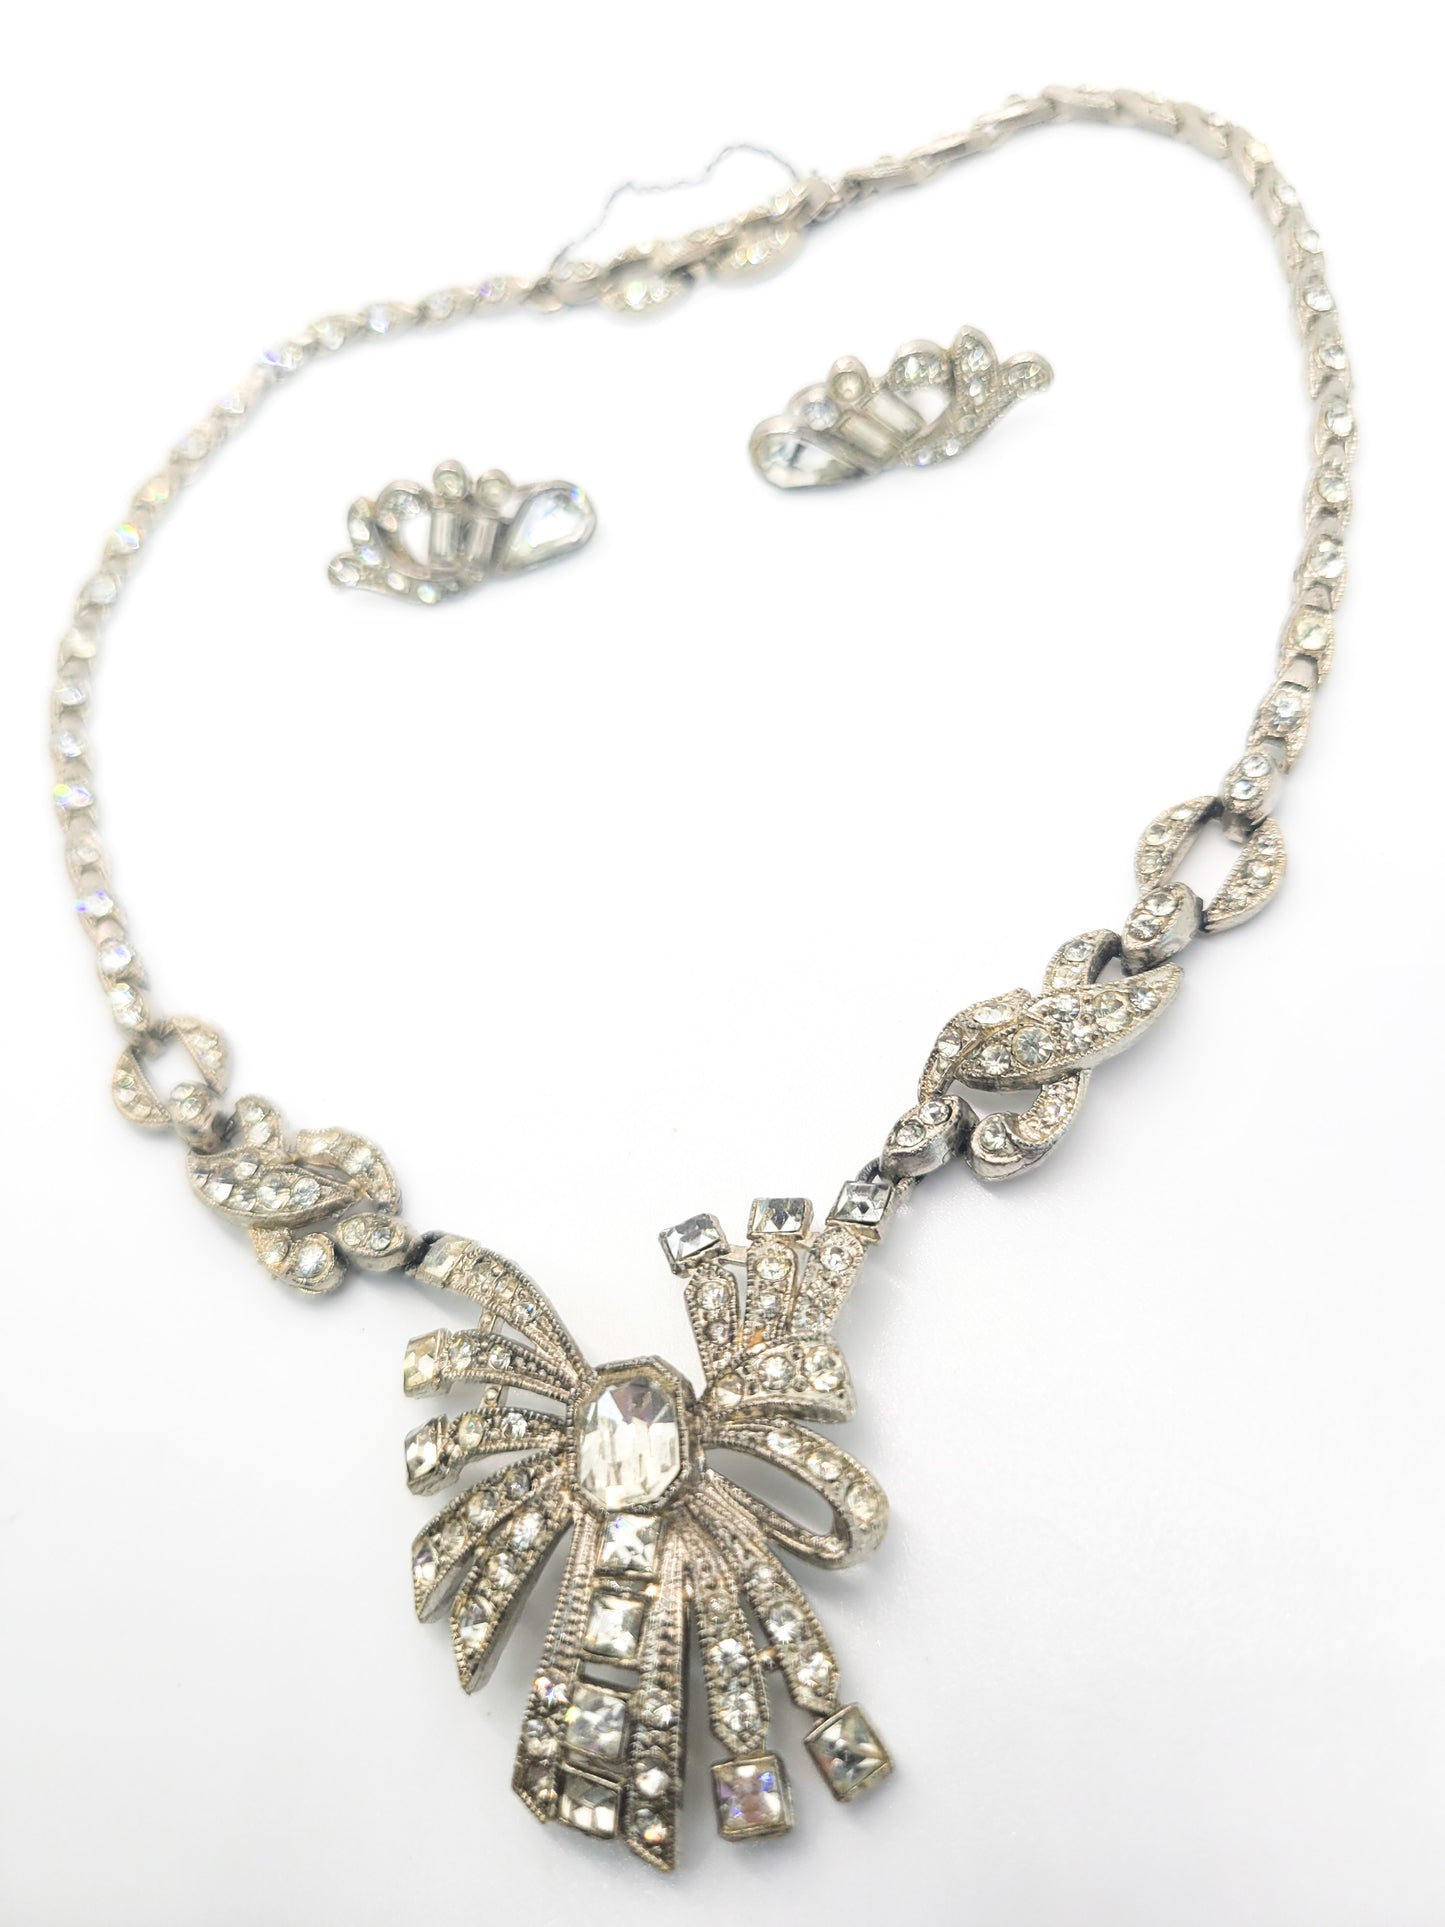 Art Deco Early Lisner demi parure Necklace and Earring vintage pave rhinestone set